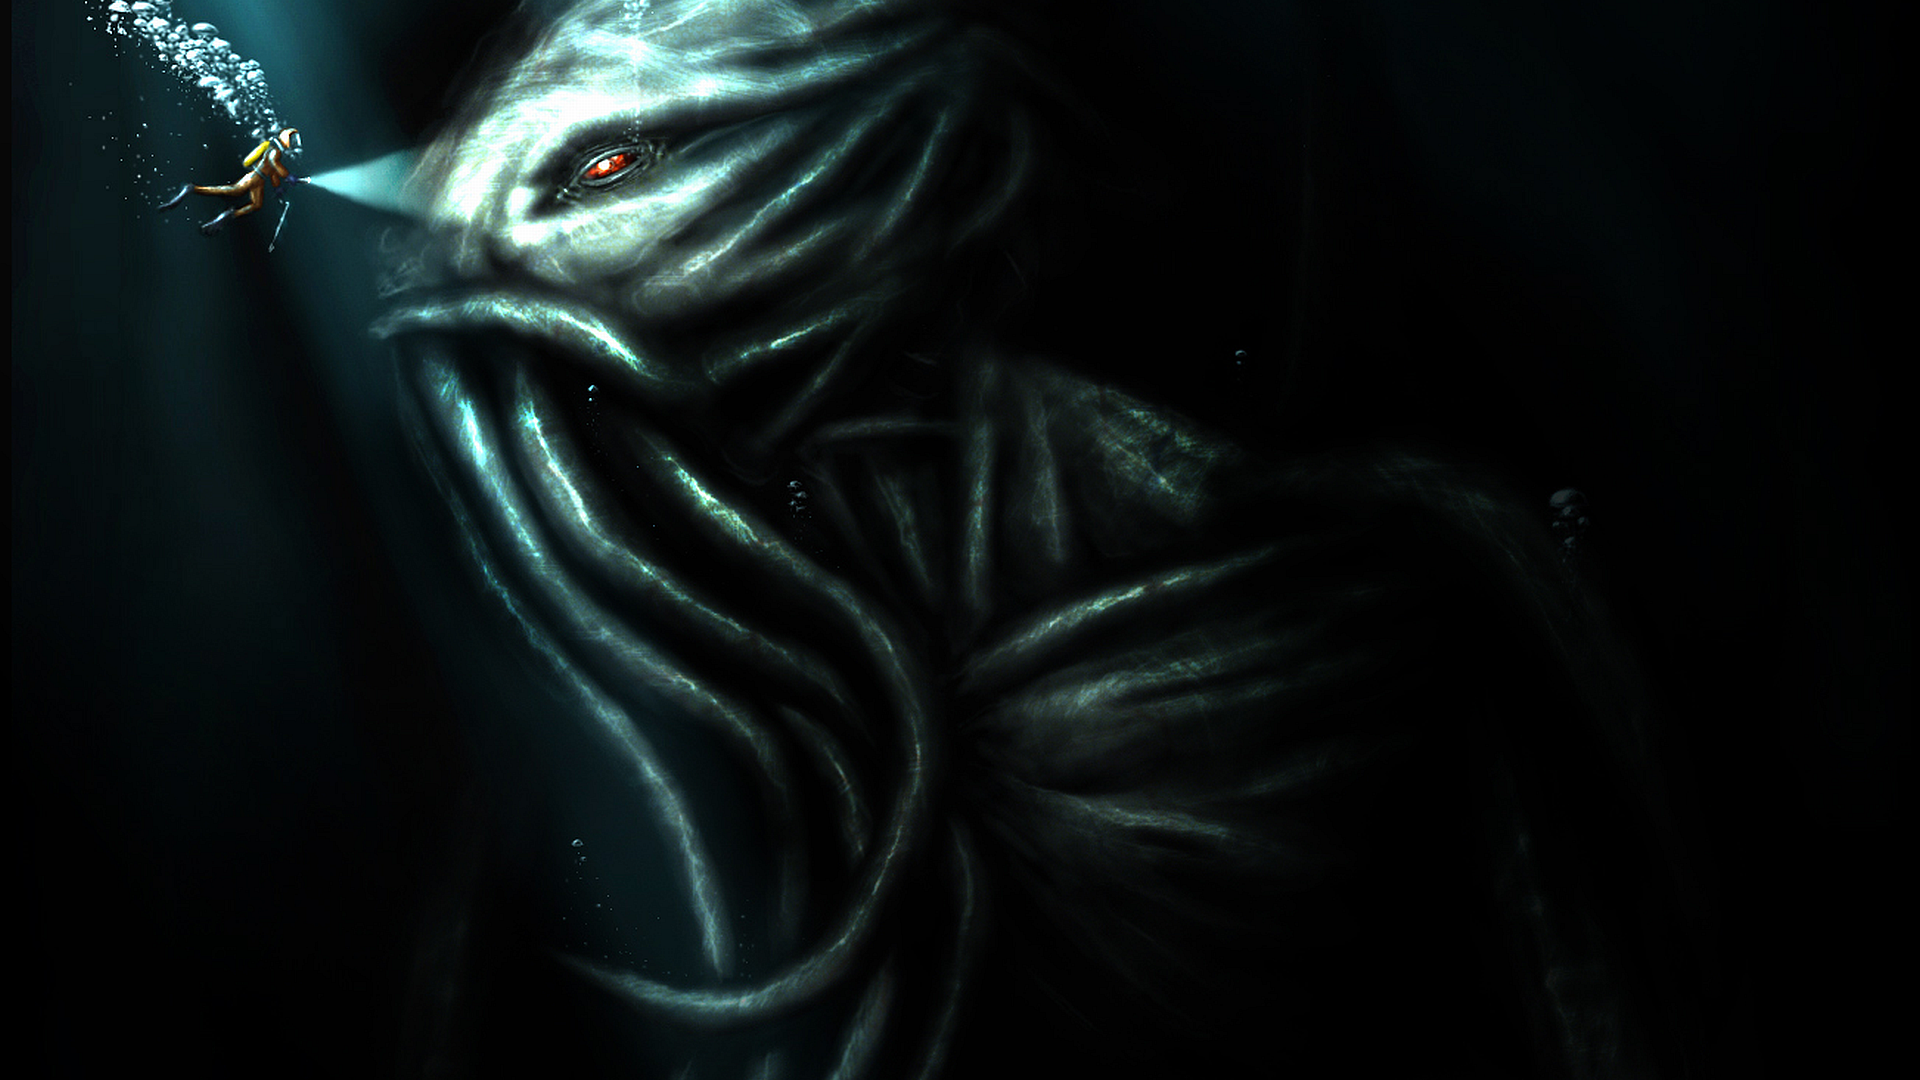 General 1920x1080 Cthulhu creature underwater divers horror H. P. Lovecraft artwork red eyes tentacles Book characters